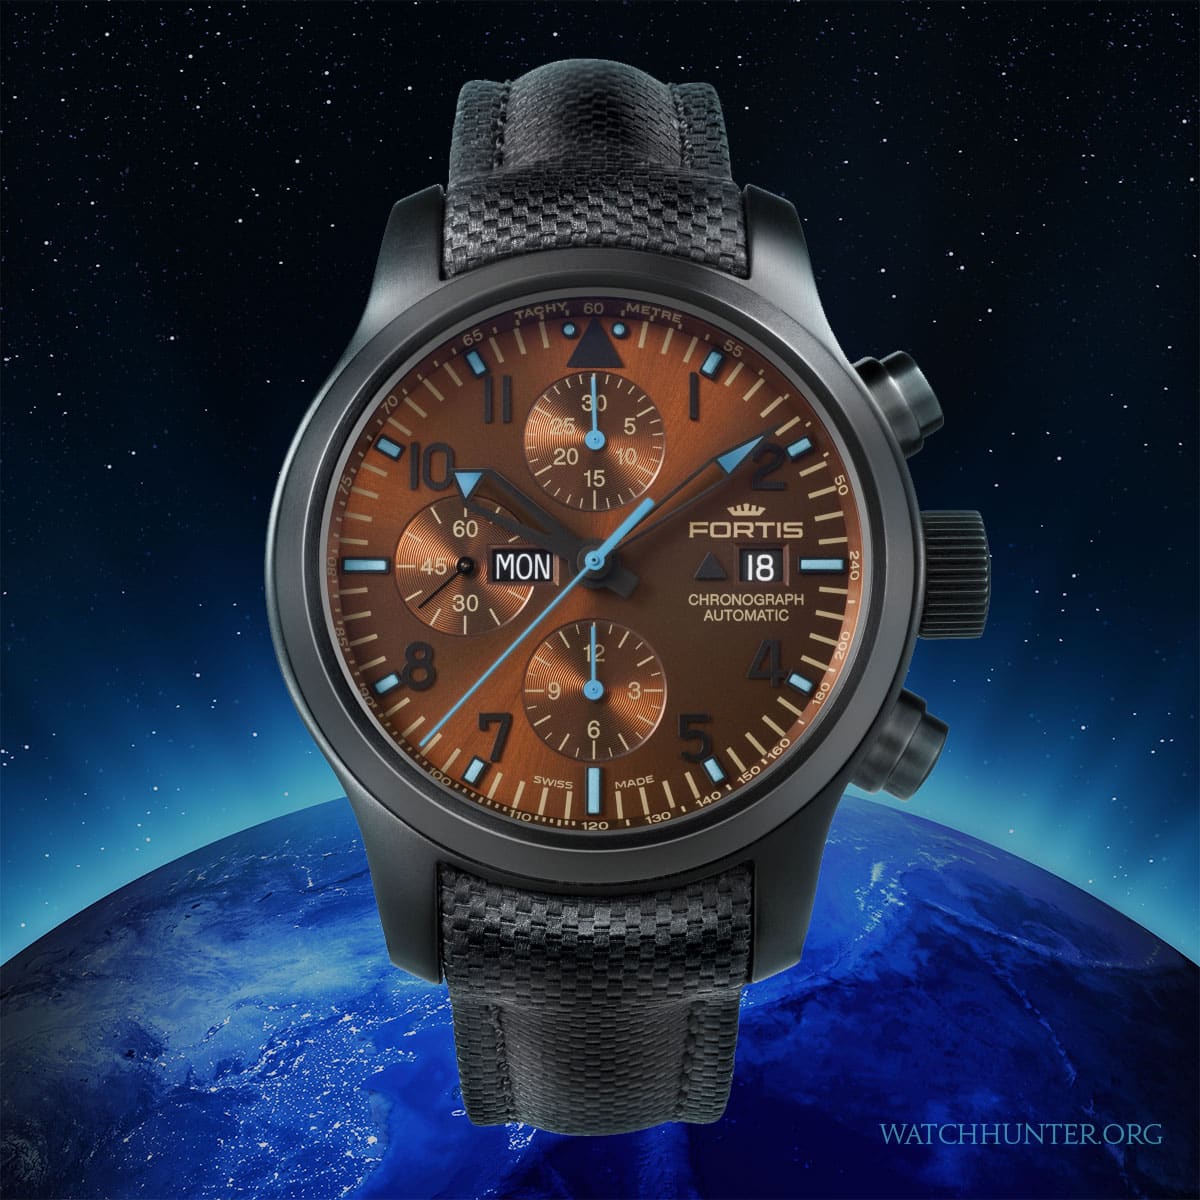 Fortis Blue Horizon Limited Edition watch with brown sunburst dial floating over Earth